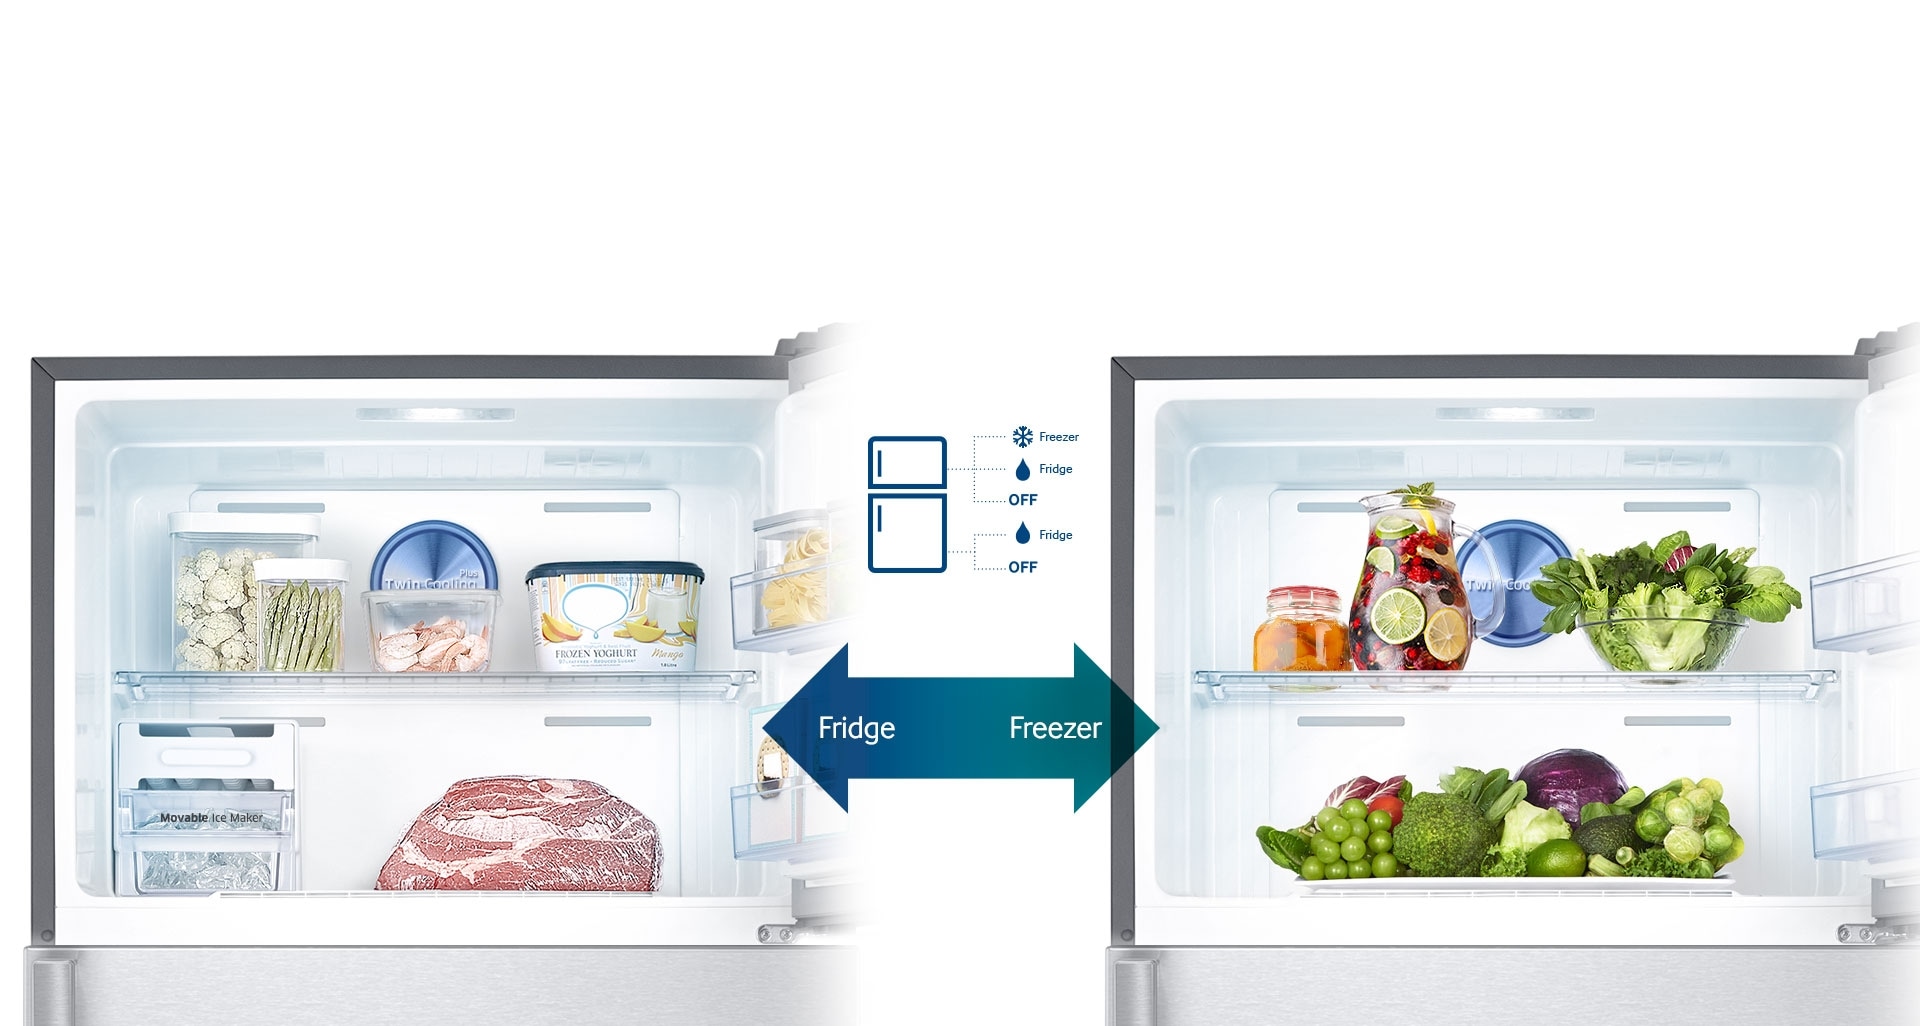 Samsung Twin Cooling Plus Top Freezer Fridge – an image showing 5 possible Conversion Modes for flexible storage